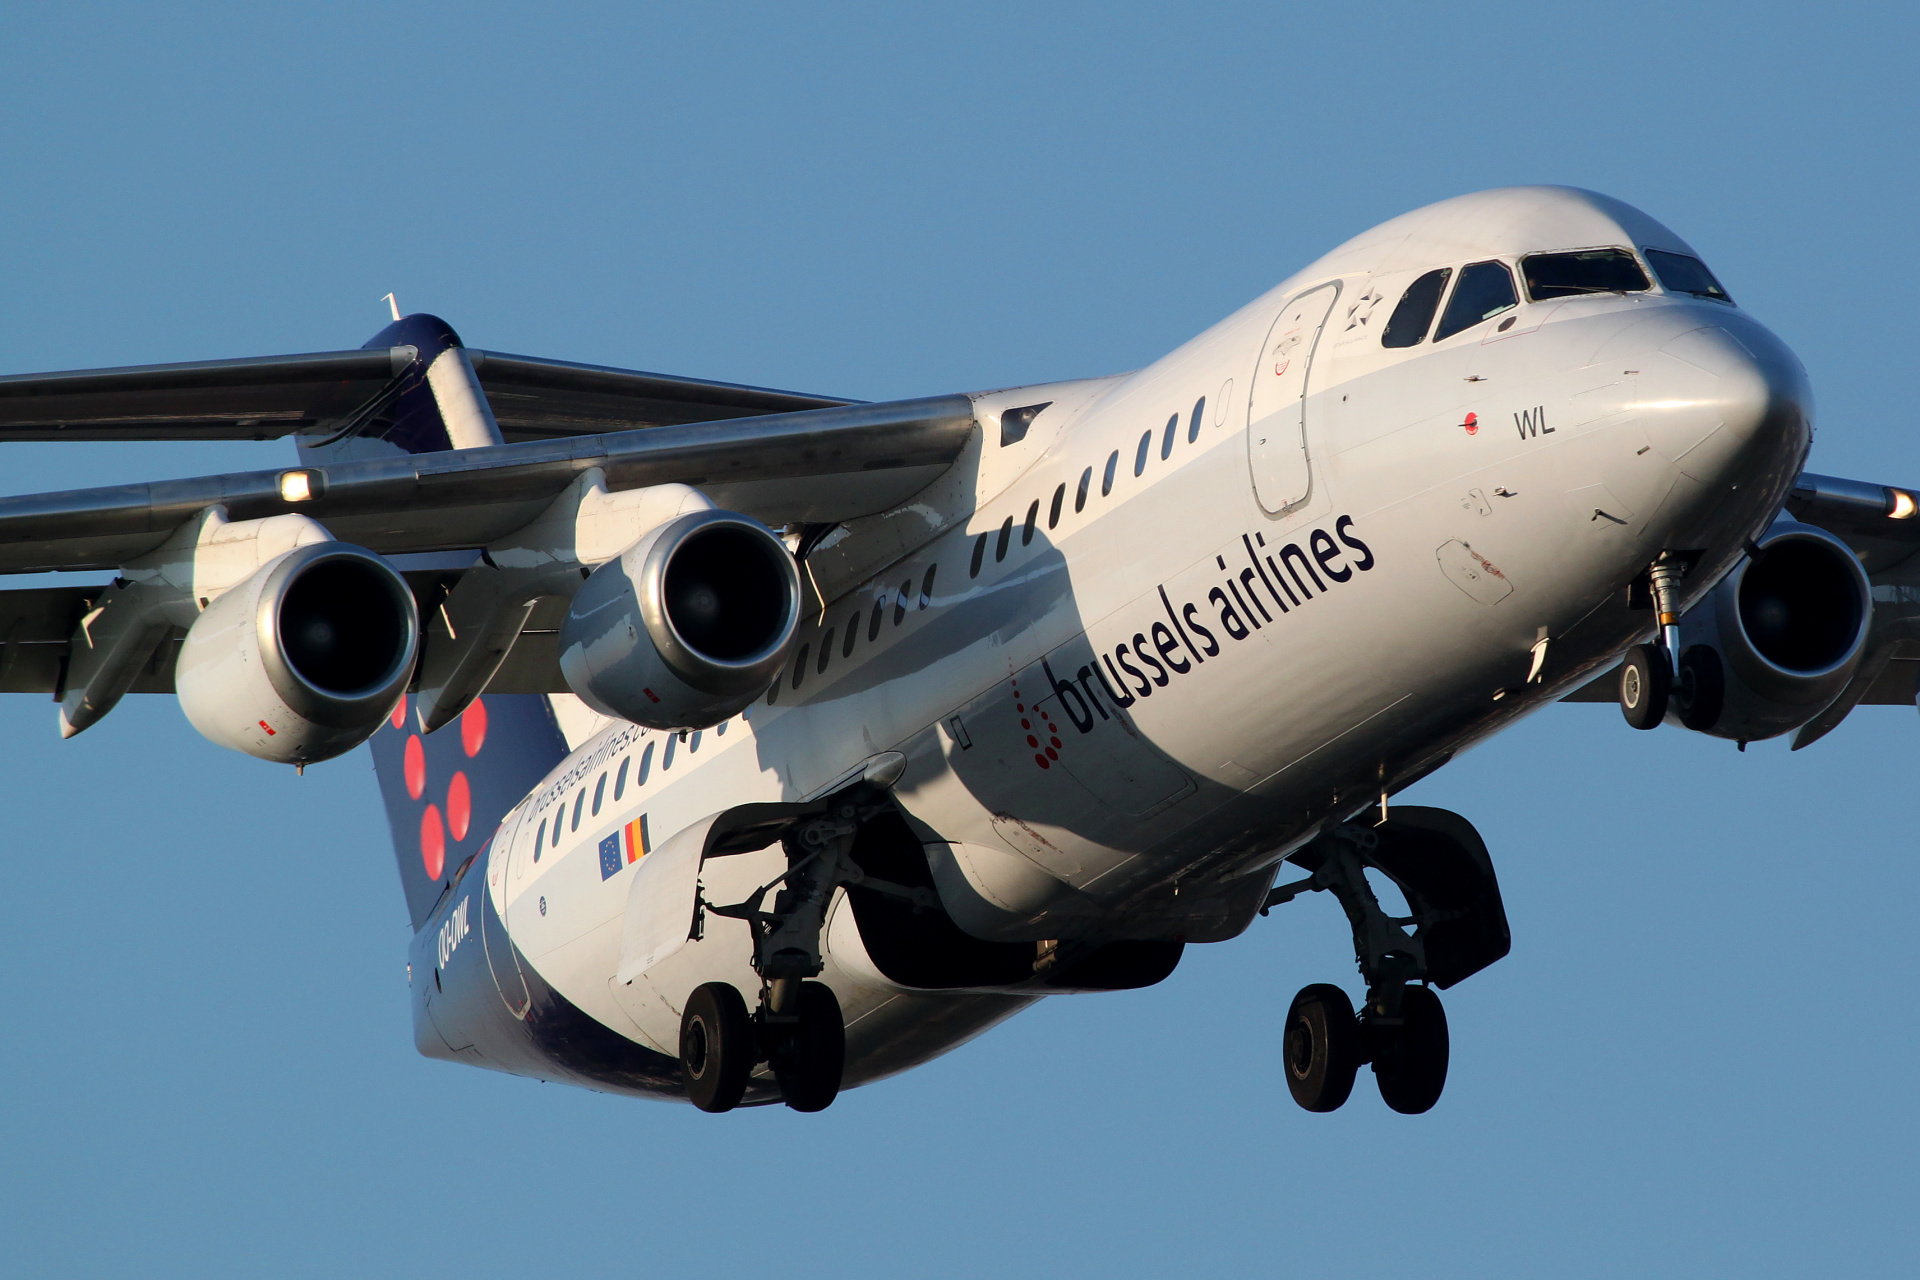 OO-DWL (Aircraft » EPWA Spotting » BAe 146 and revisions » Avro RJ100 » Brussels Airlines)